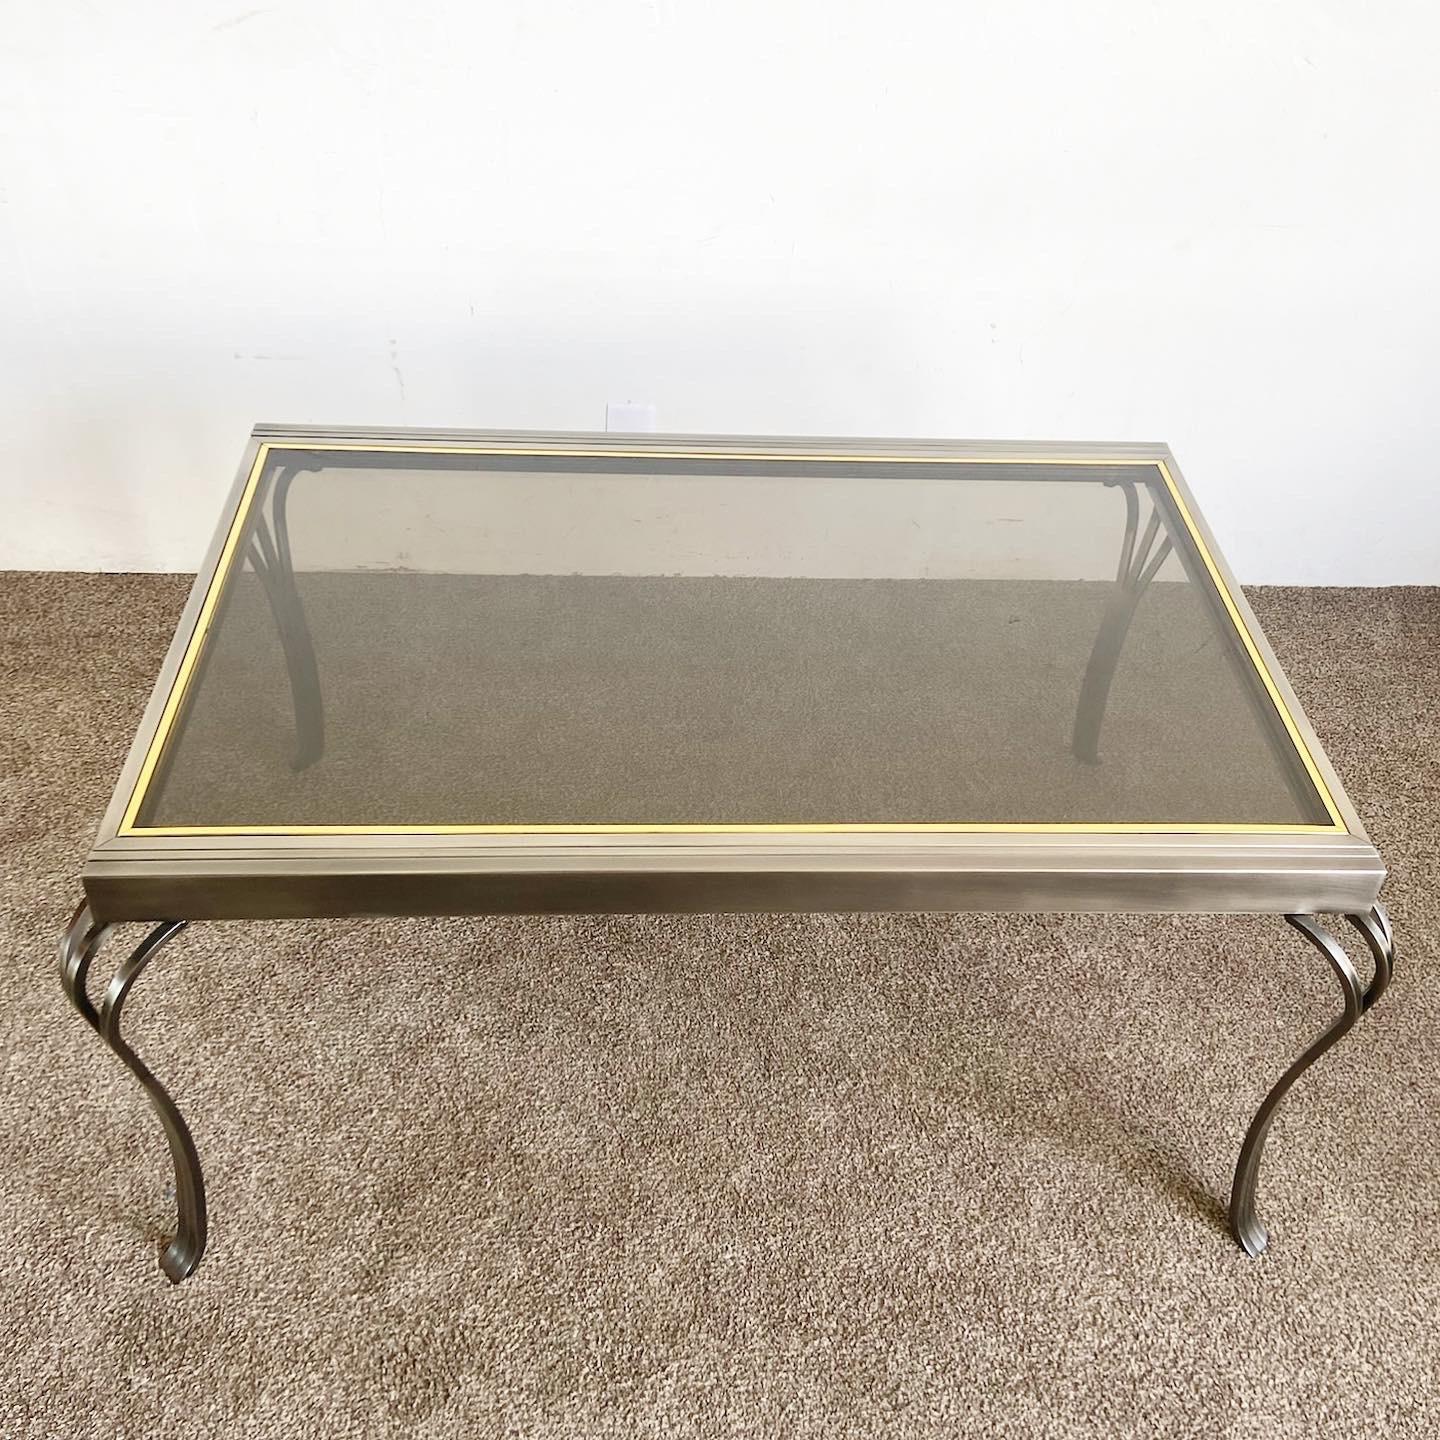 Experience a blend of modern elegance and functional design with our Brushed Metal Smoke Glass Top Extendable Dining Table by Design Institute America, a perfect addition to any contemporary dining space.

Elegant, extendable dining table by Design